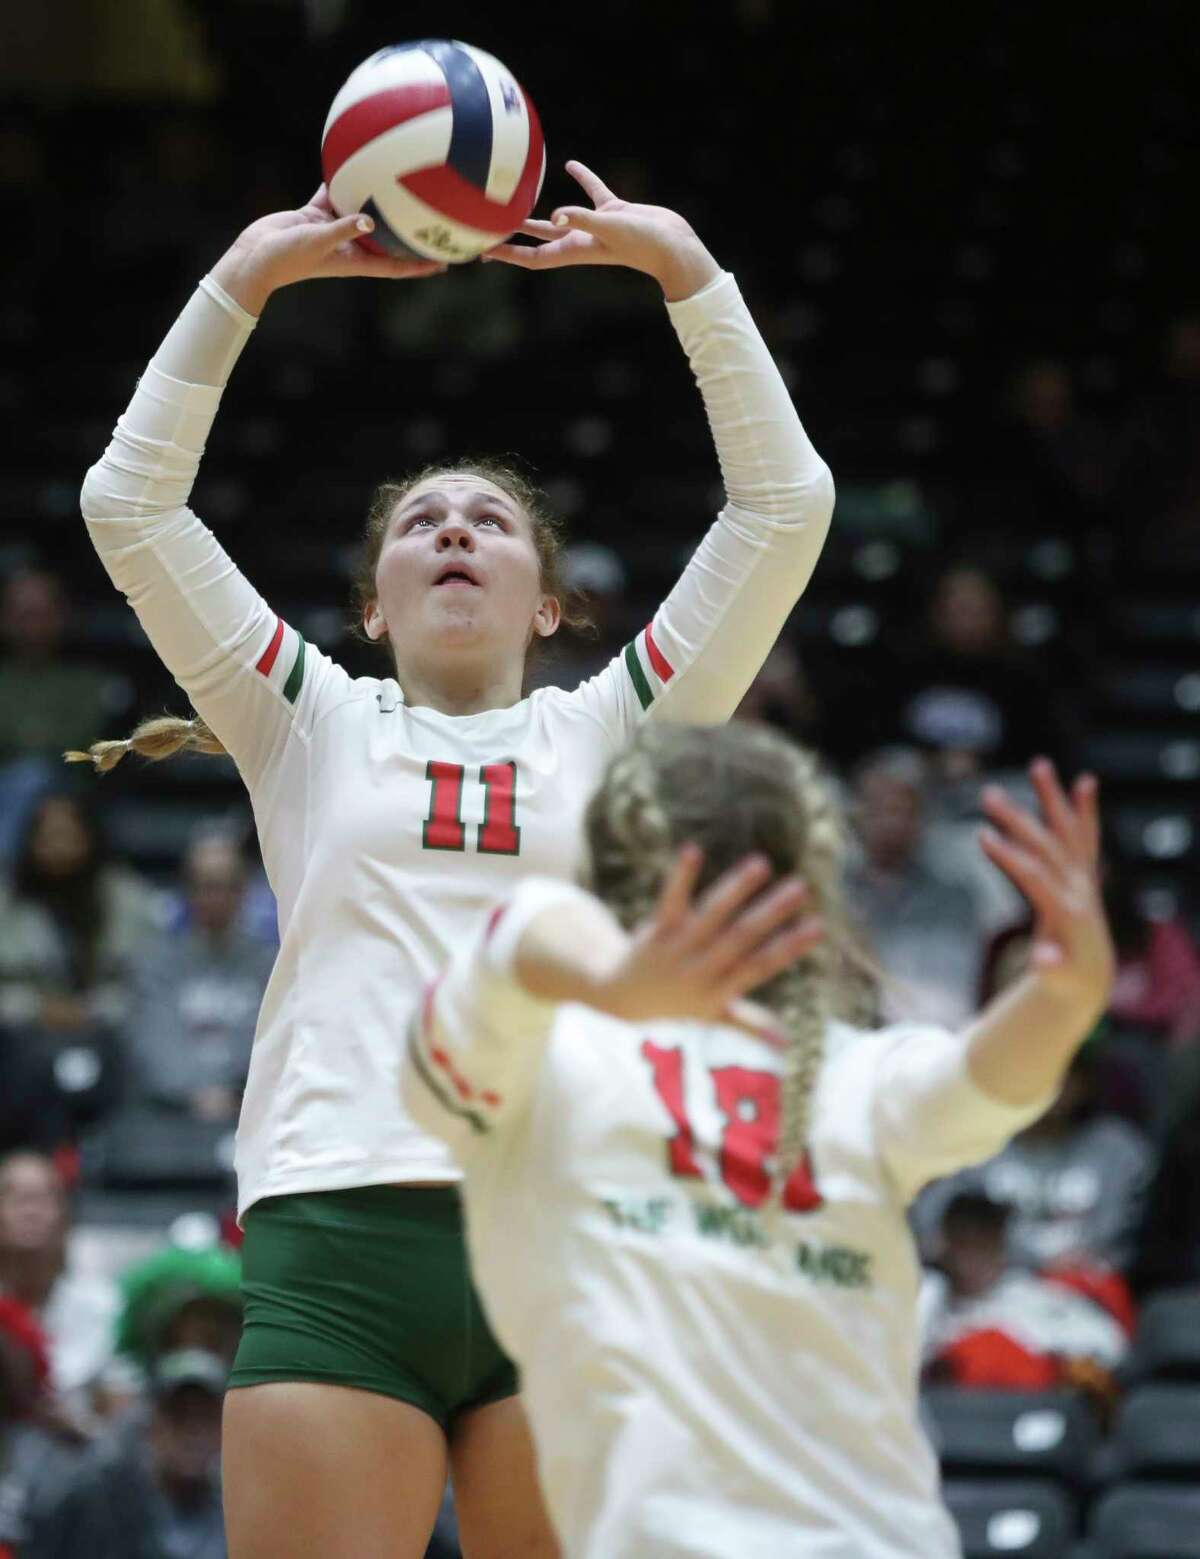 The Woodlands' Olivia Chojnacki (11) sets the ball in the second set of a Class 6A state semifinal match during the UIL State Volleyball Championships at the Curtis Culwell Center, Friday, Nov. 18, 2022, in Garland.